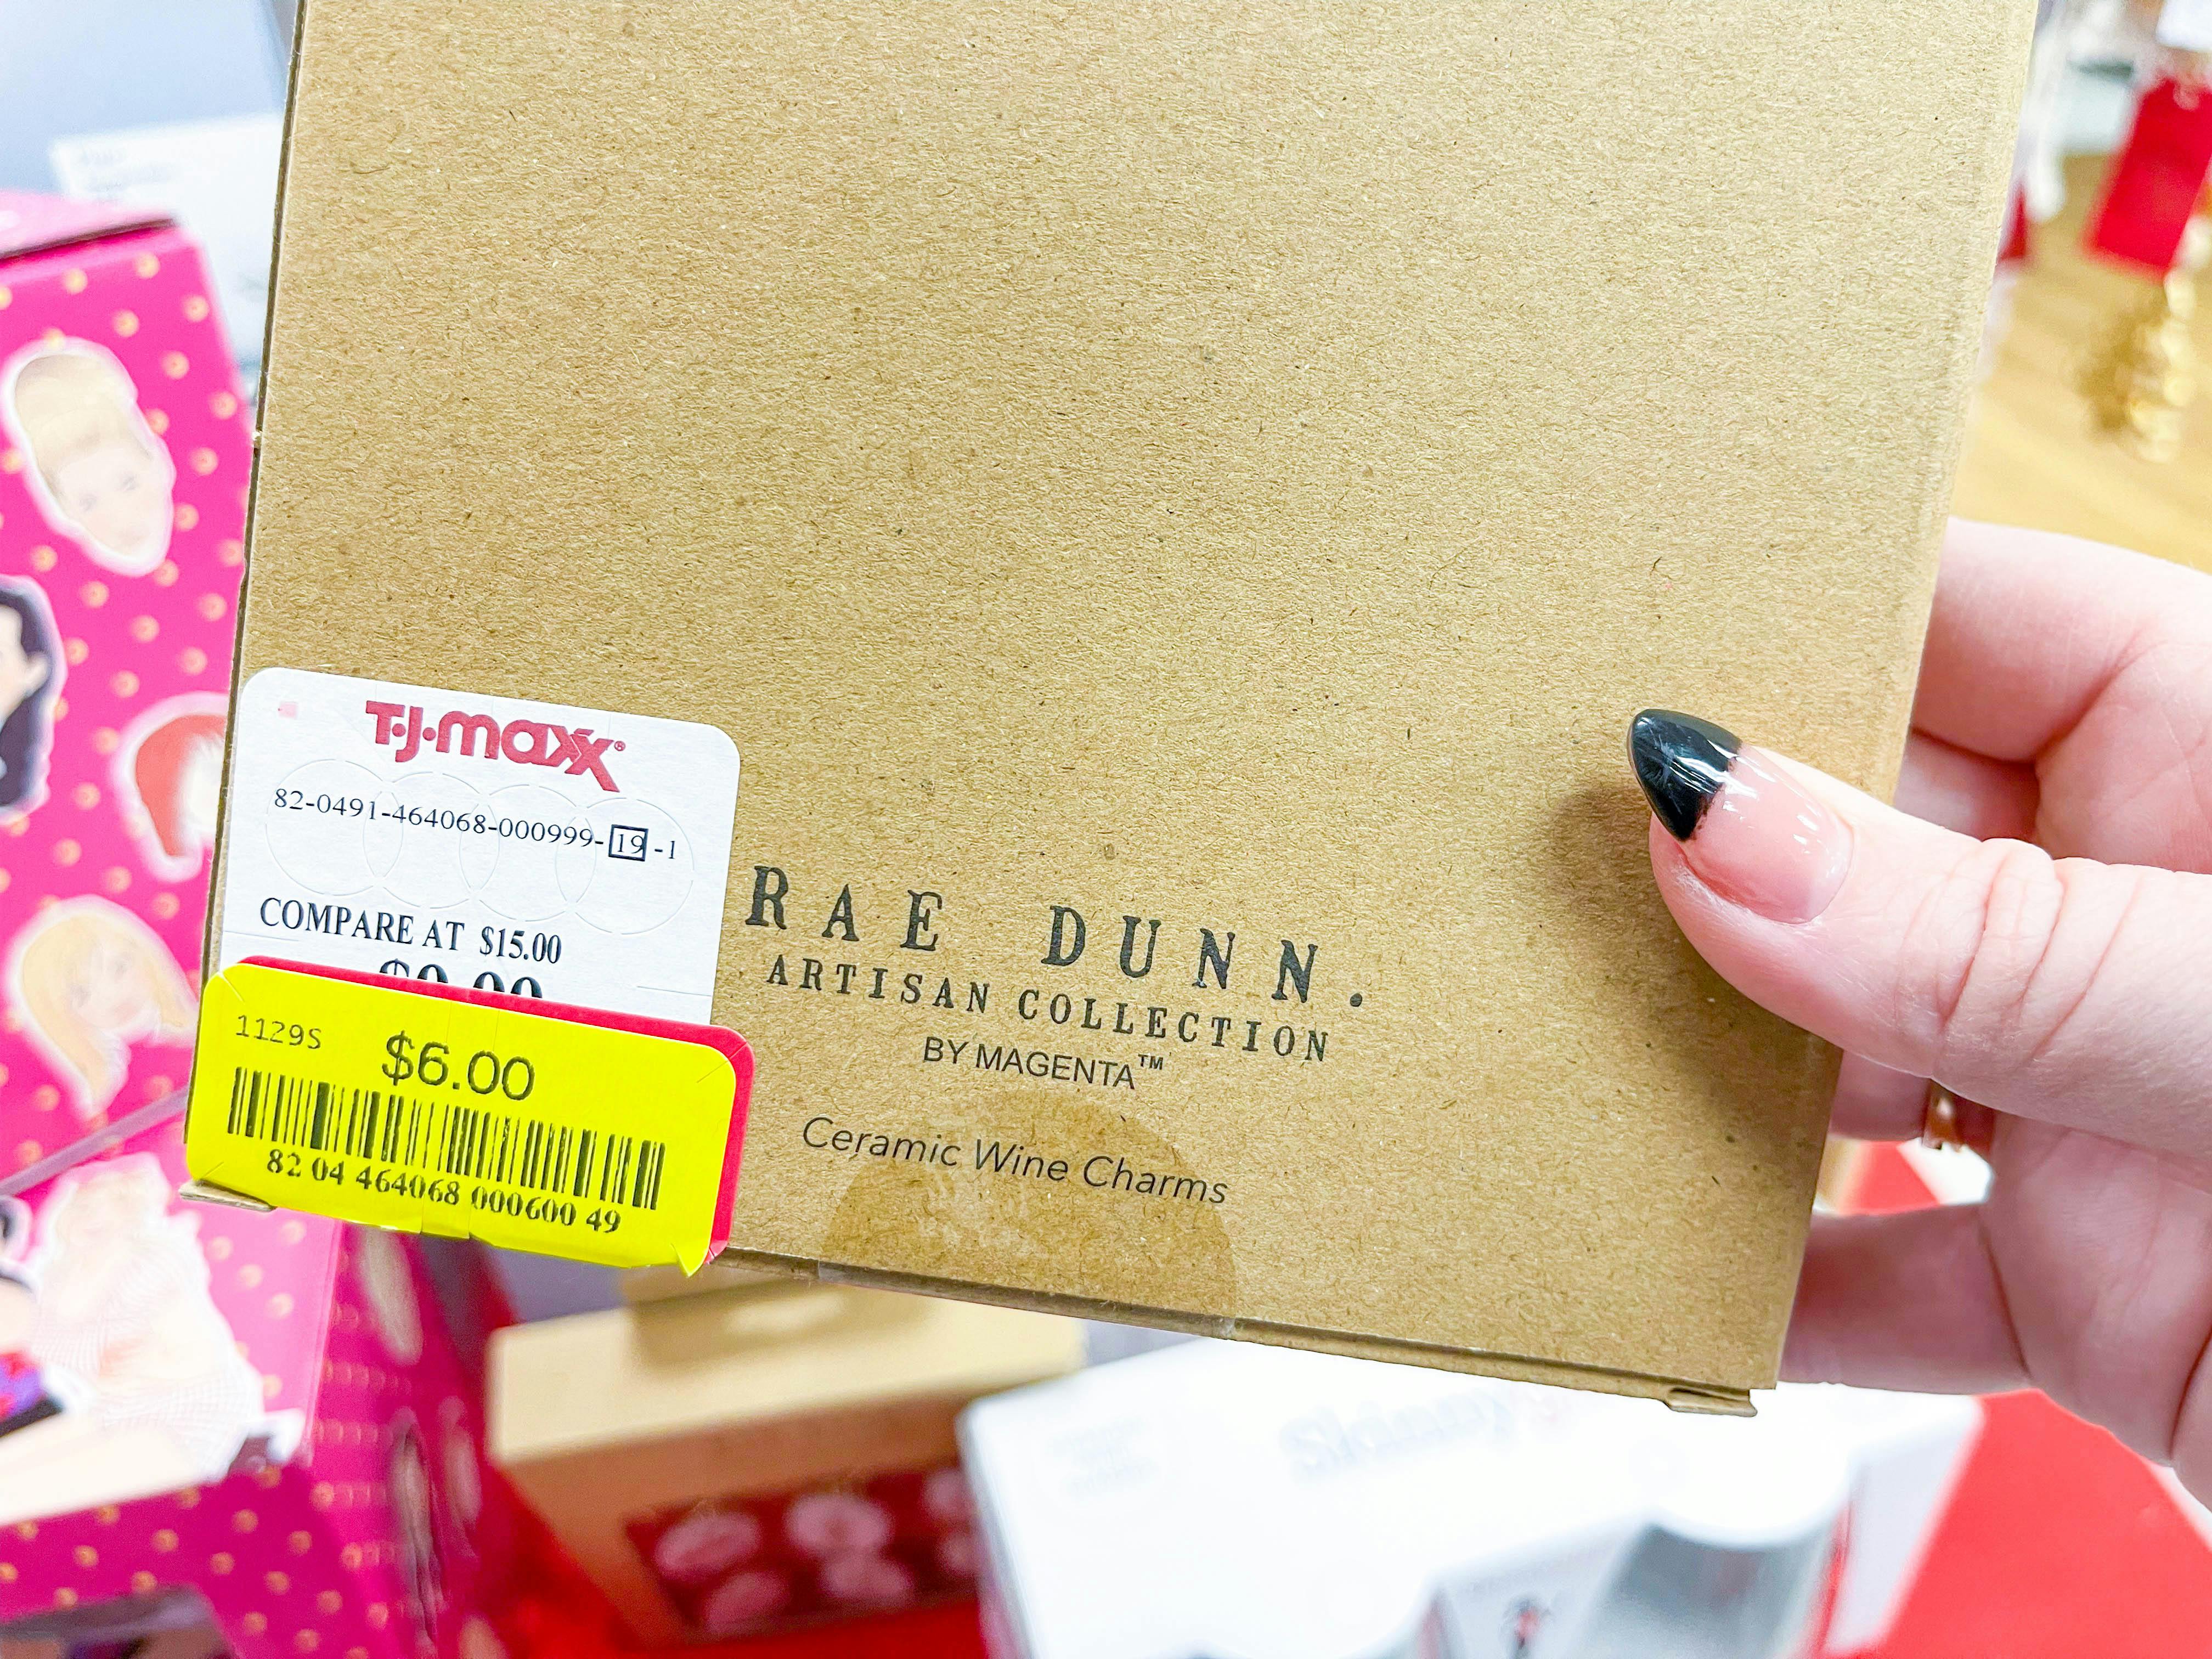 A person's hand holding a Rae Dunn by Magenta product with a clearance sticker.